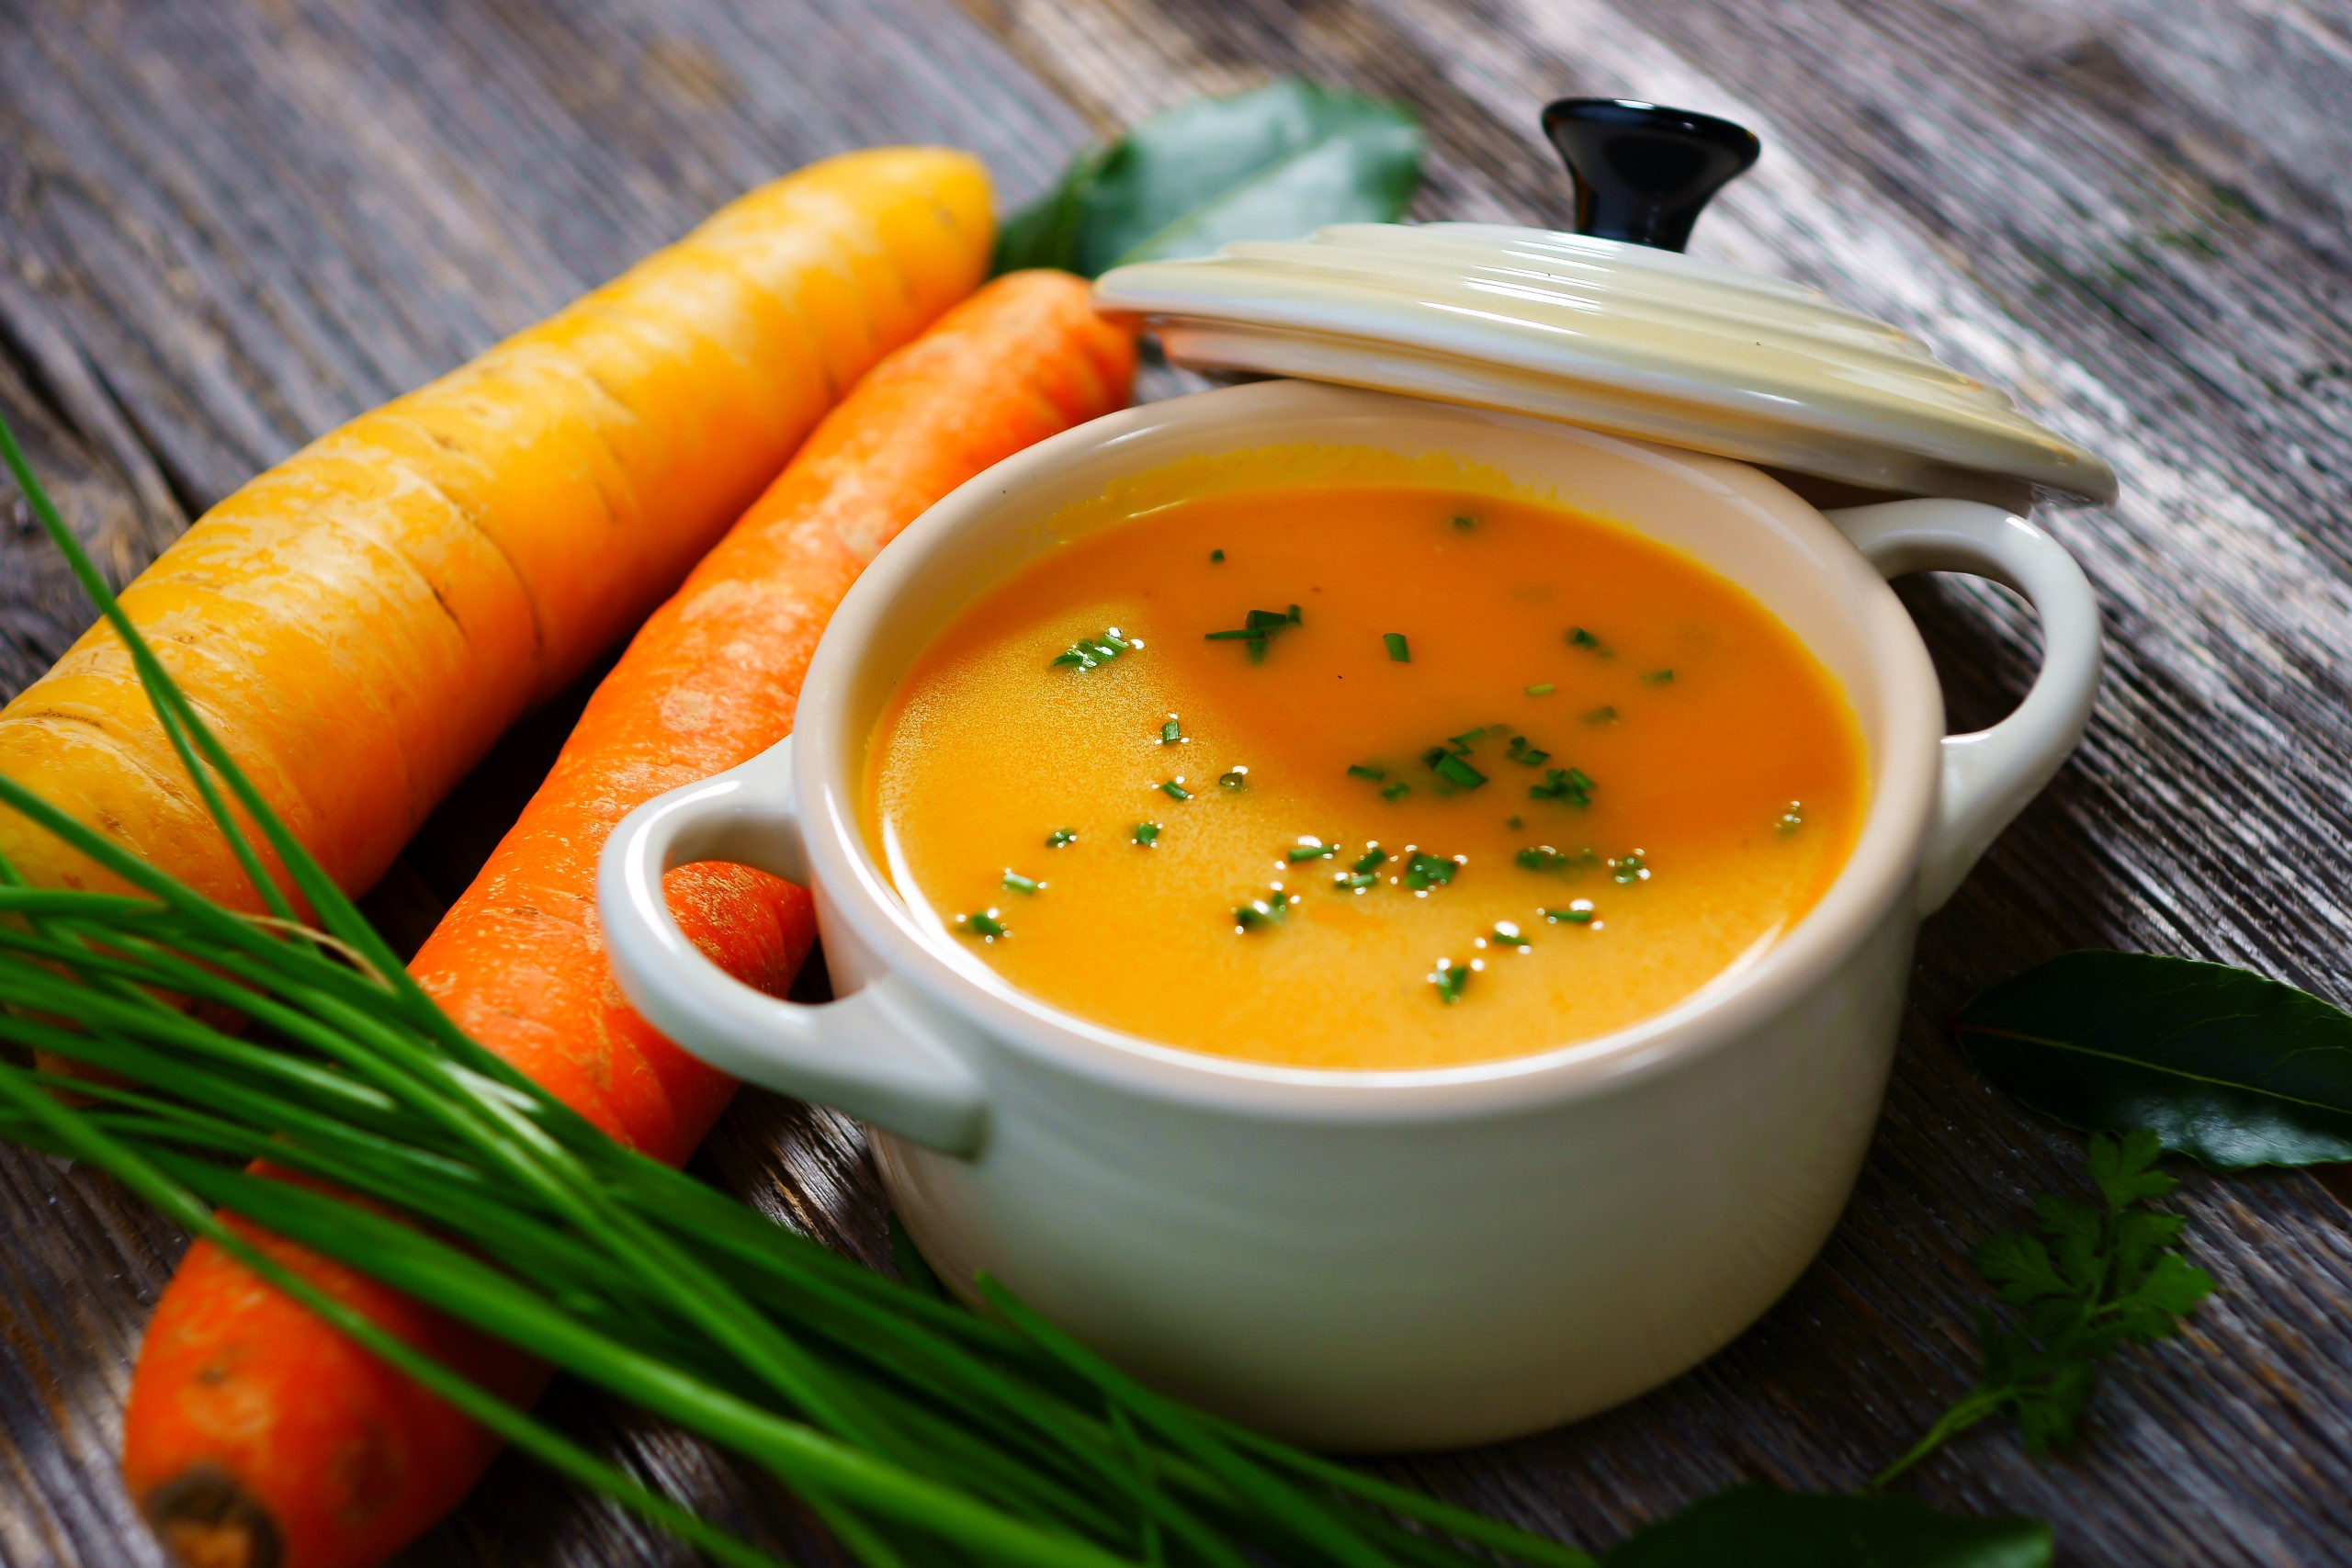 Spiced Carrot Soup*